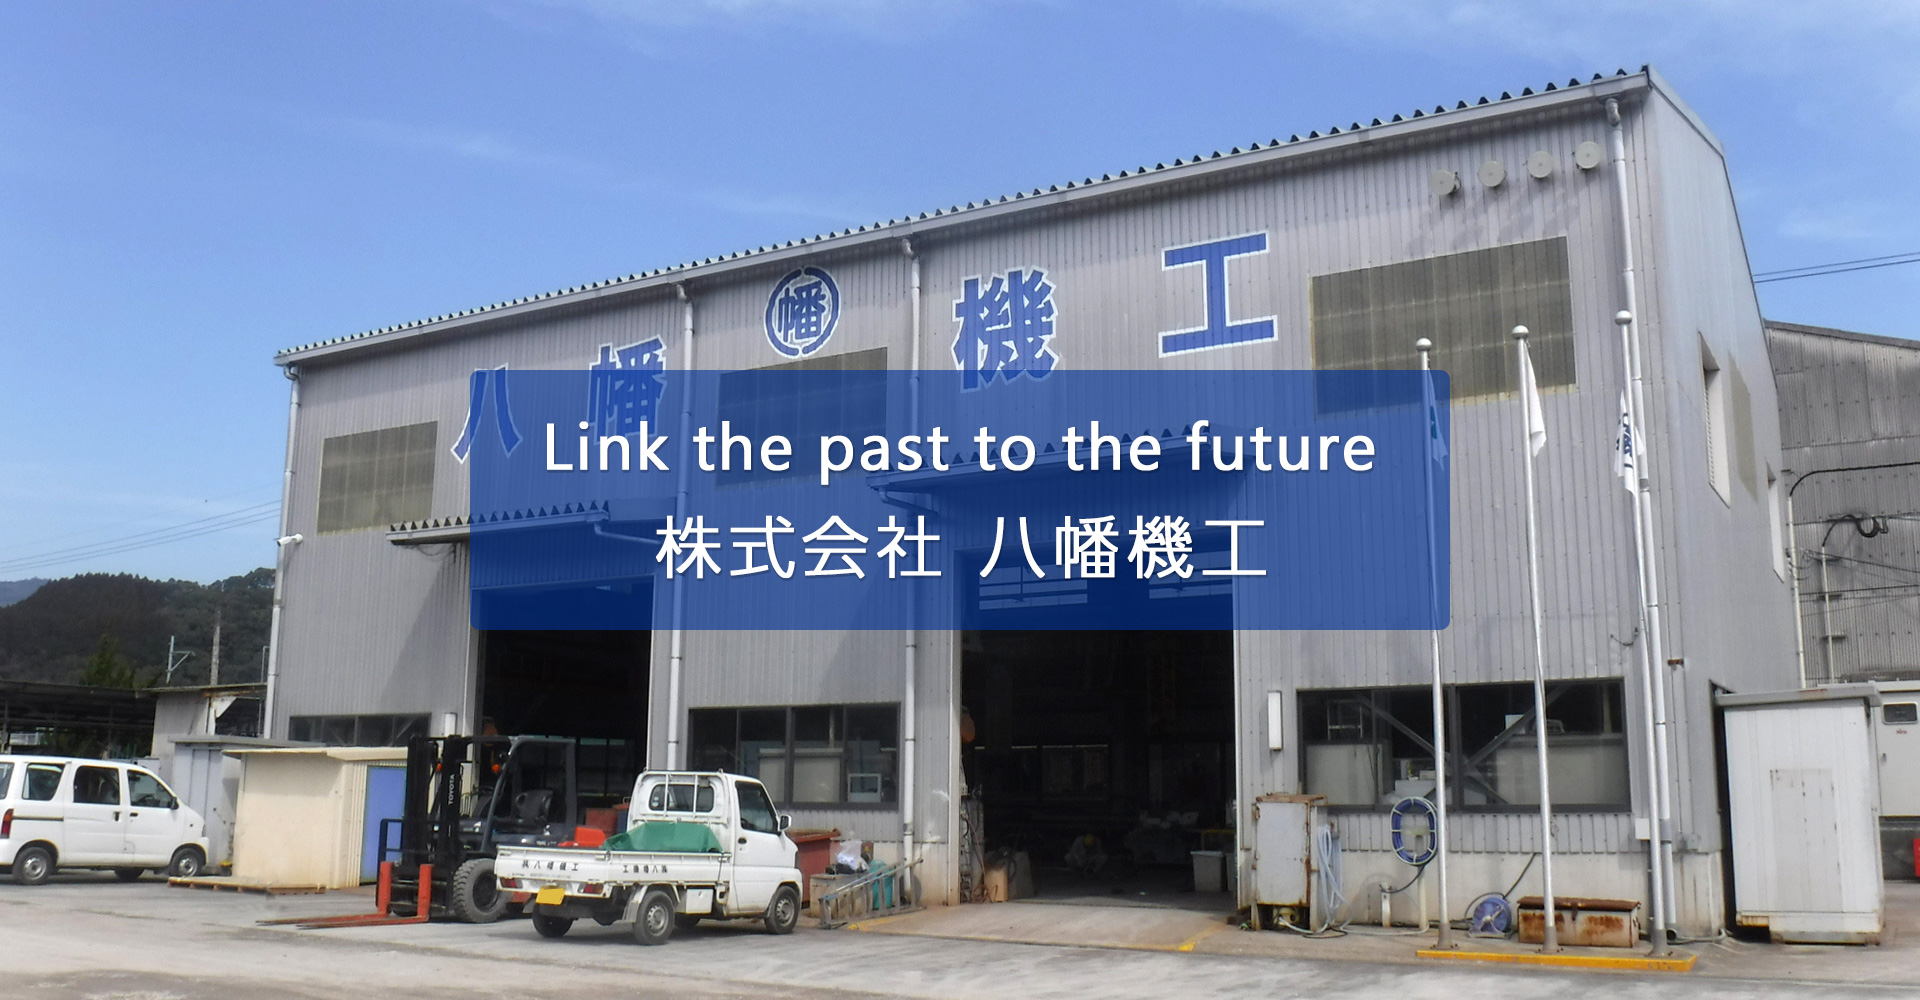 Link the past to to the future